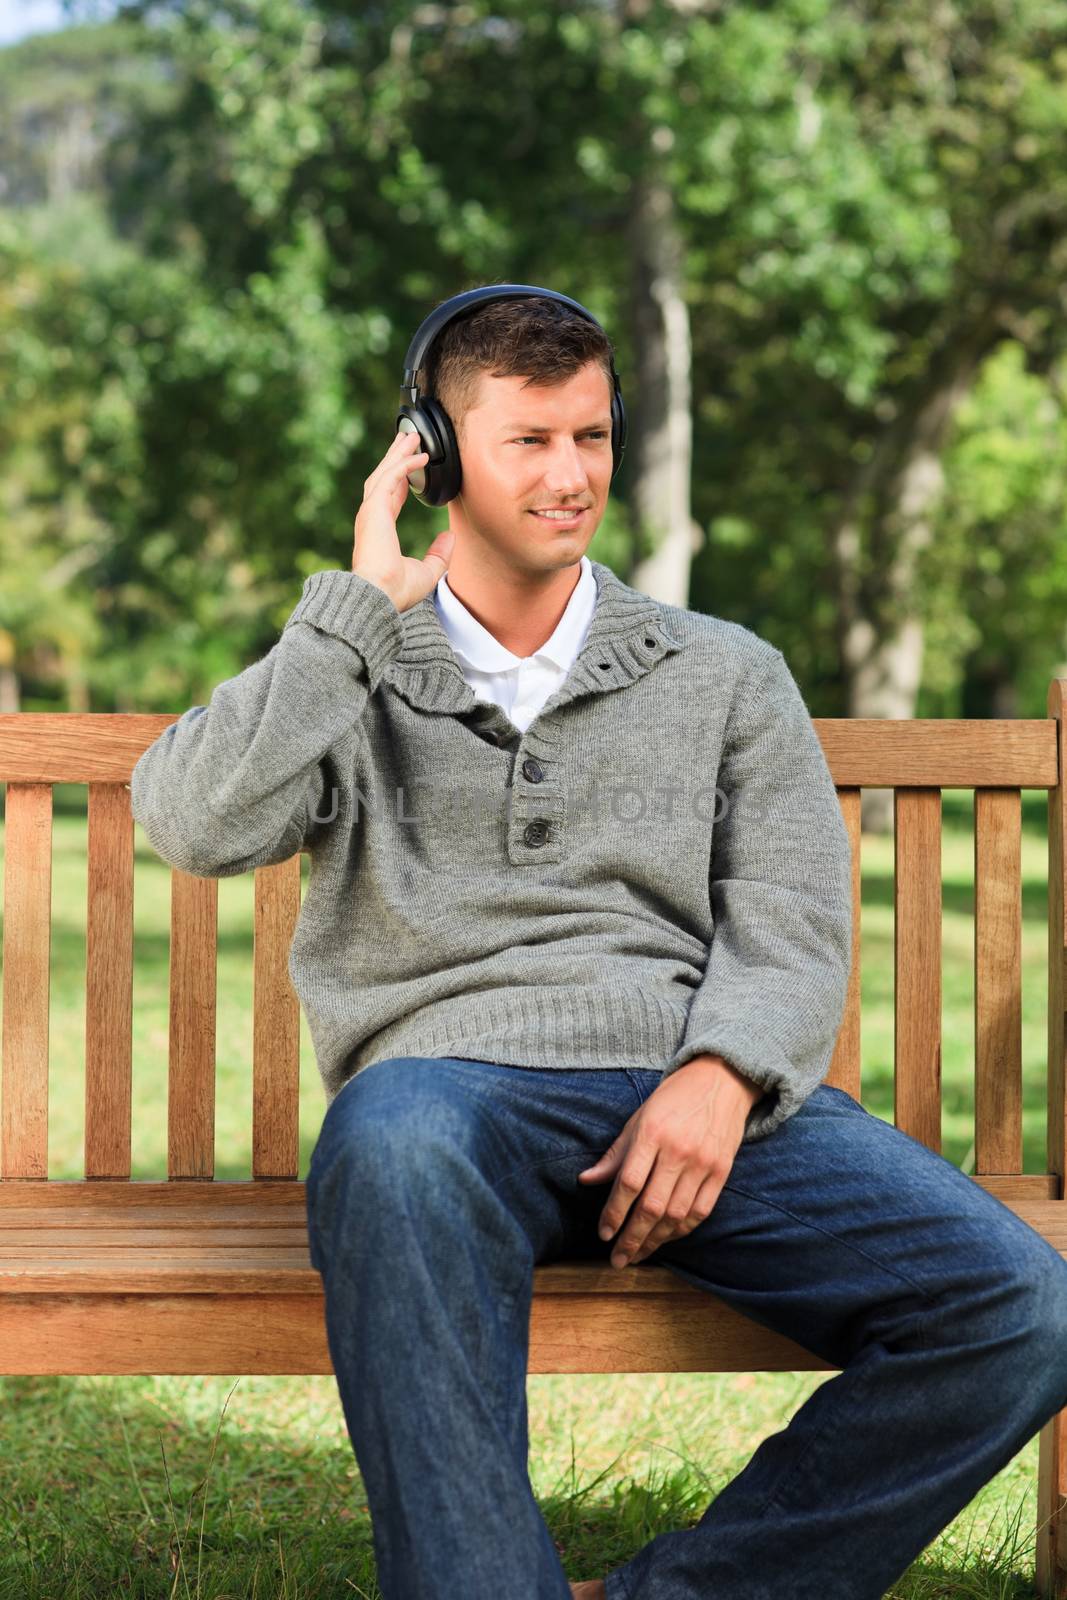 Relaxed man listening to some music during the summer